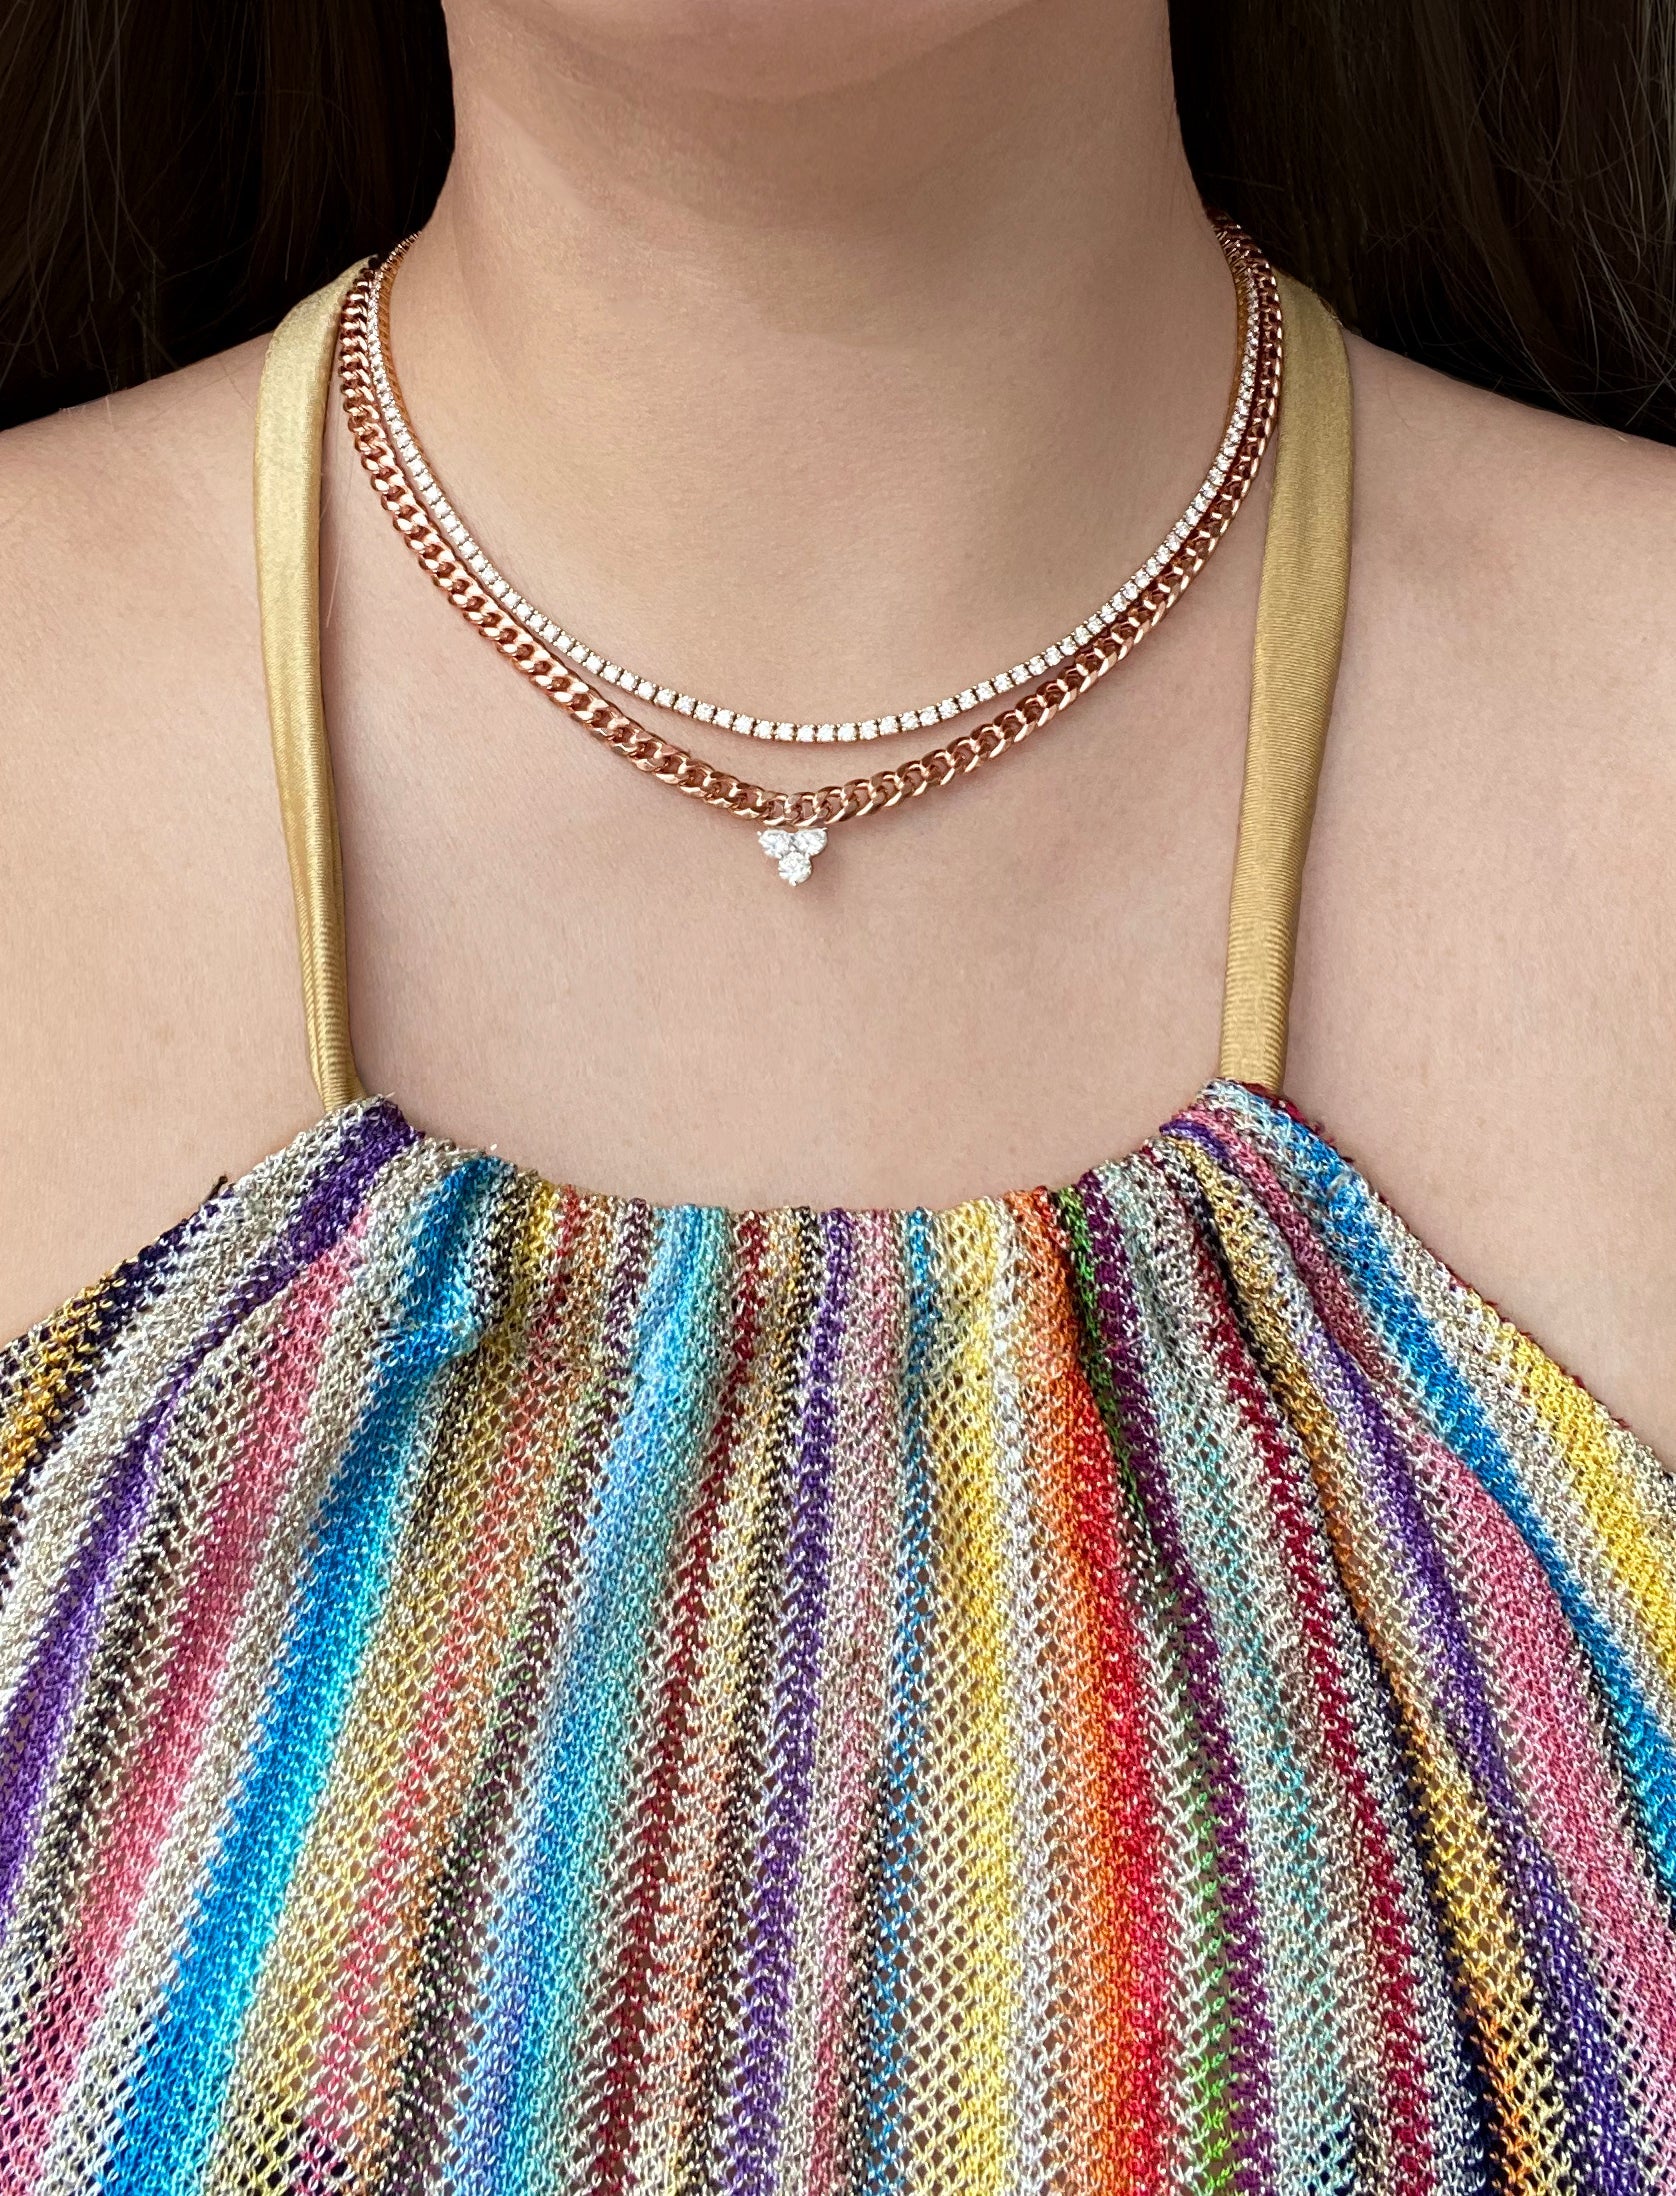 Trinity Diamonds Chain Necklace with Extensions in Rose|Yellow Gold